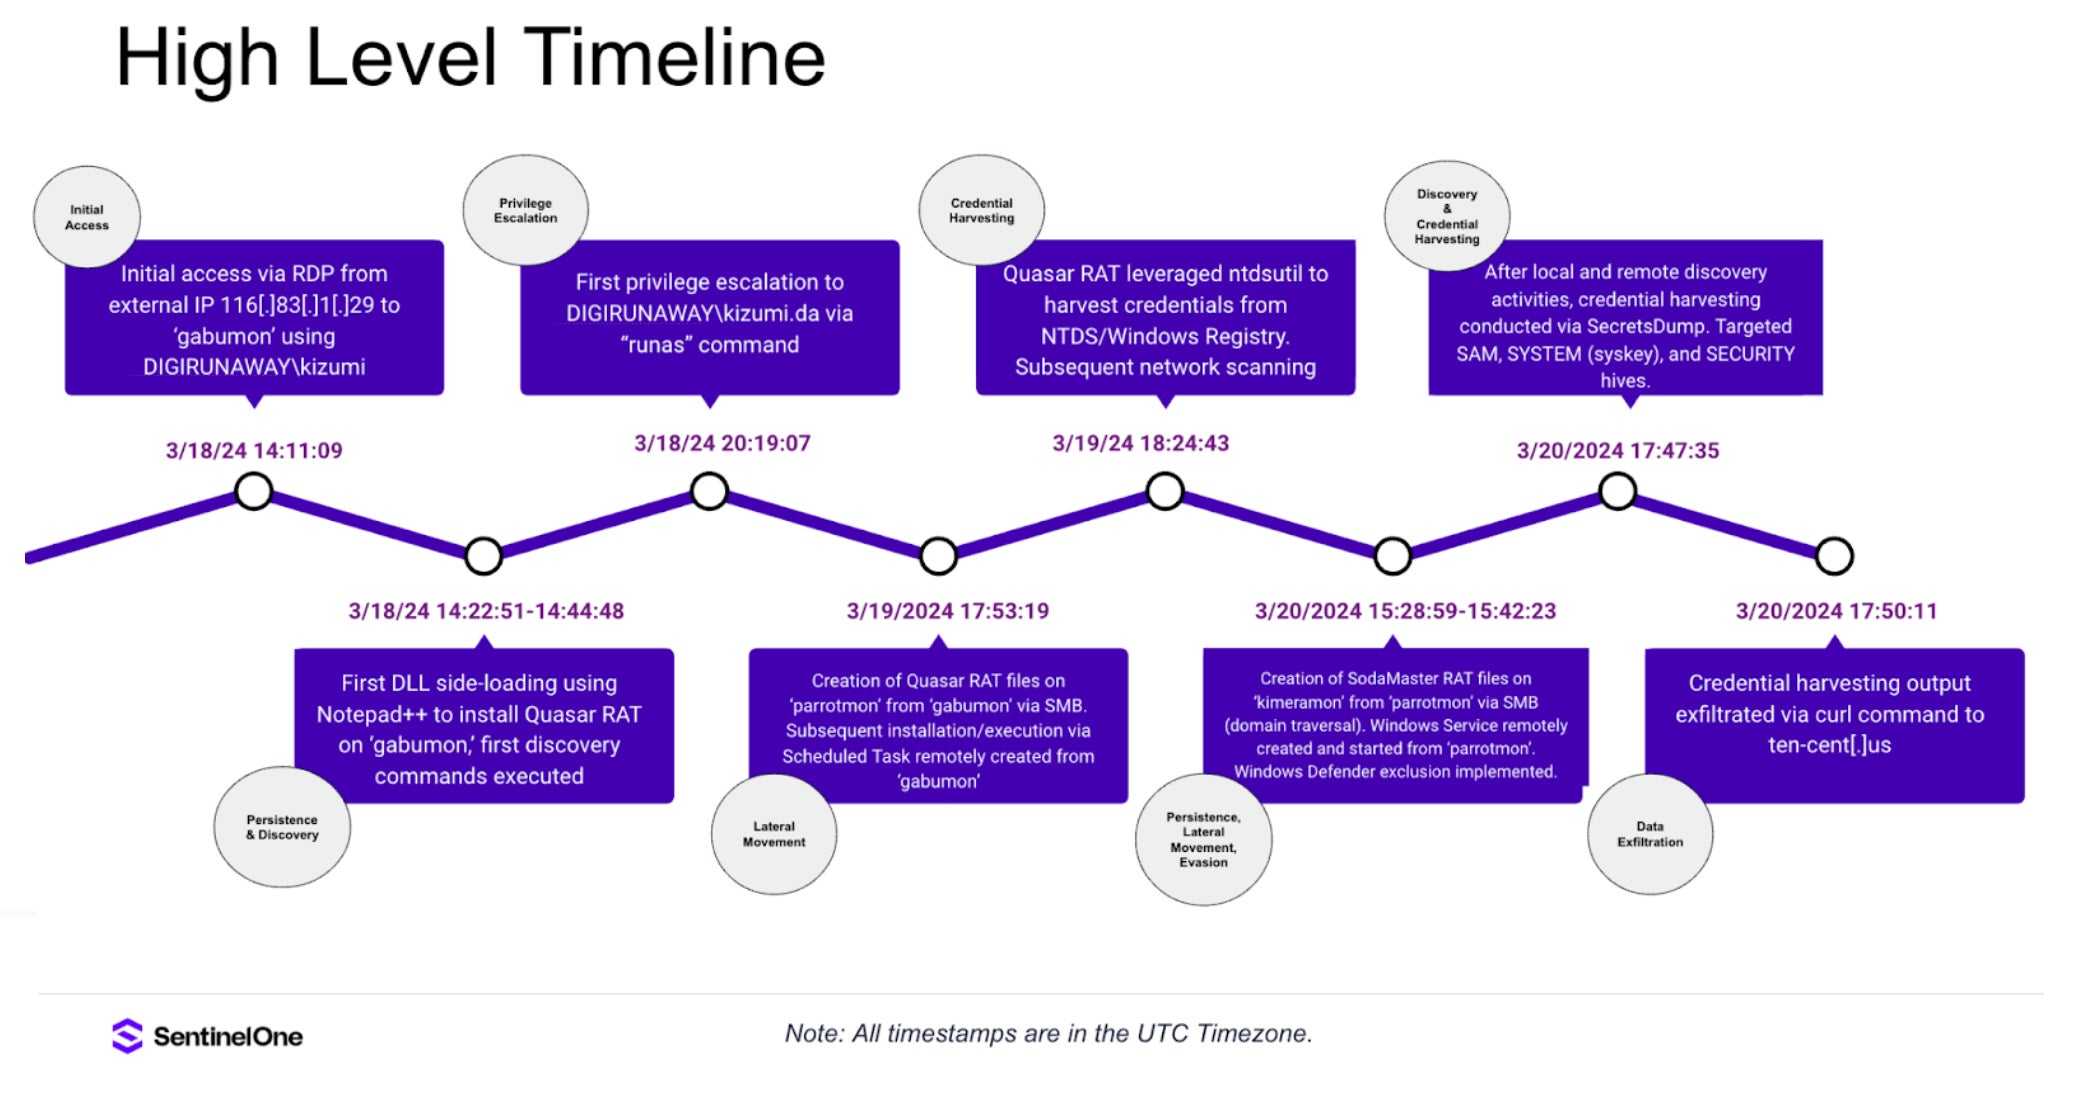 Figure 2: Timeline of key events provided as part of a daily incident summary